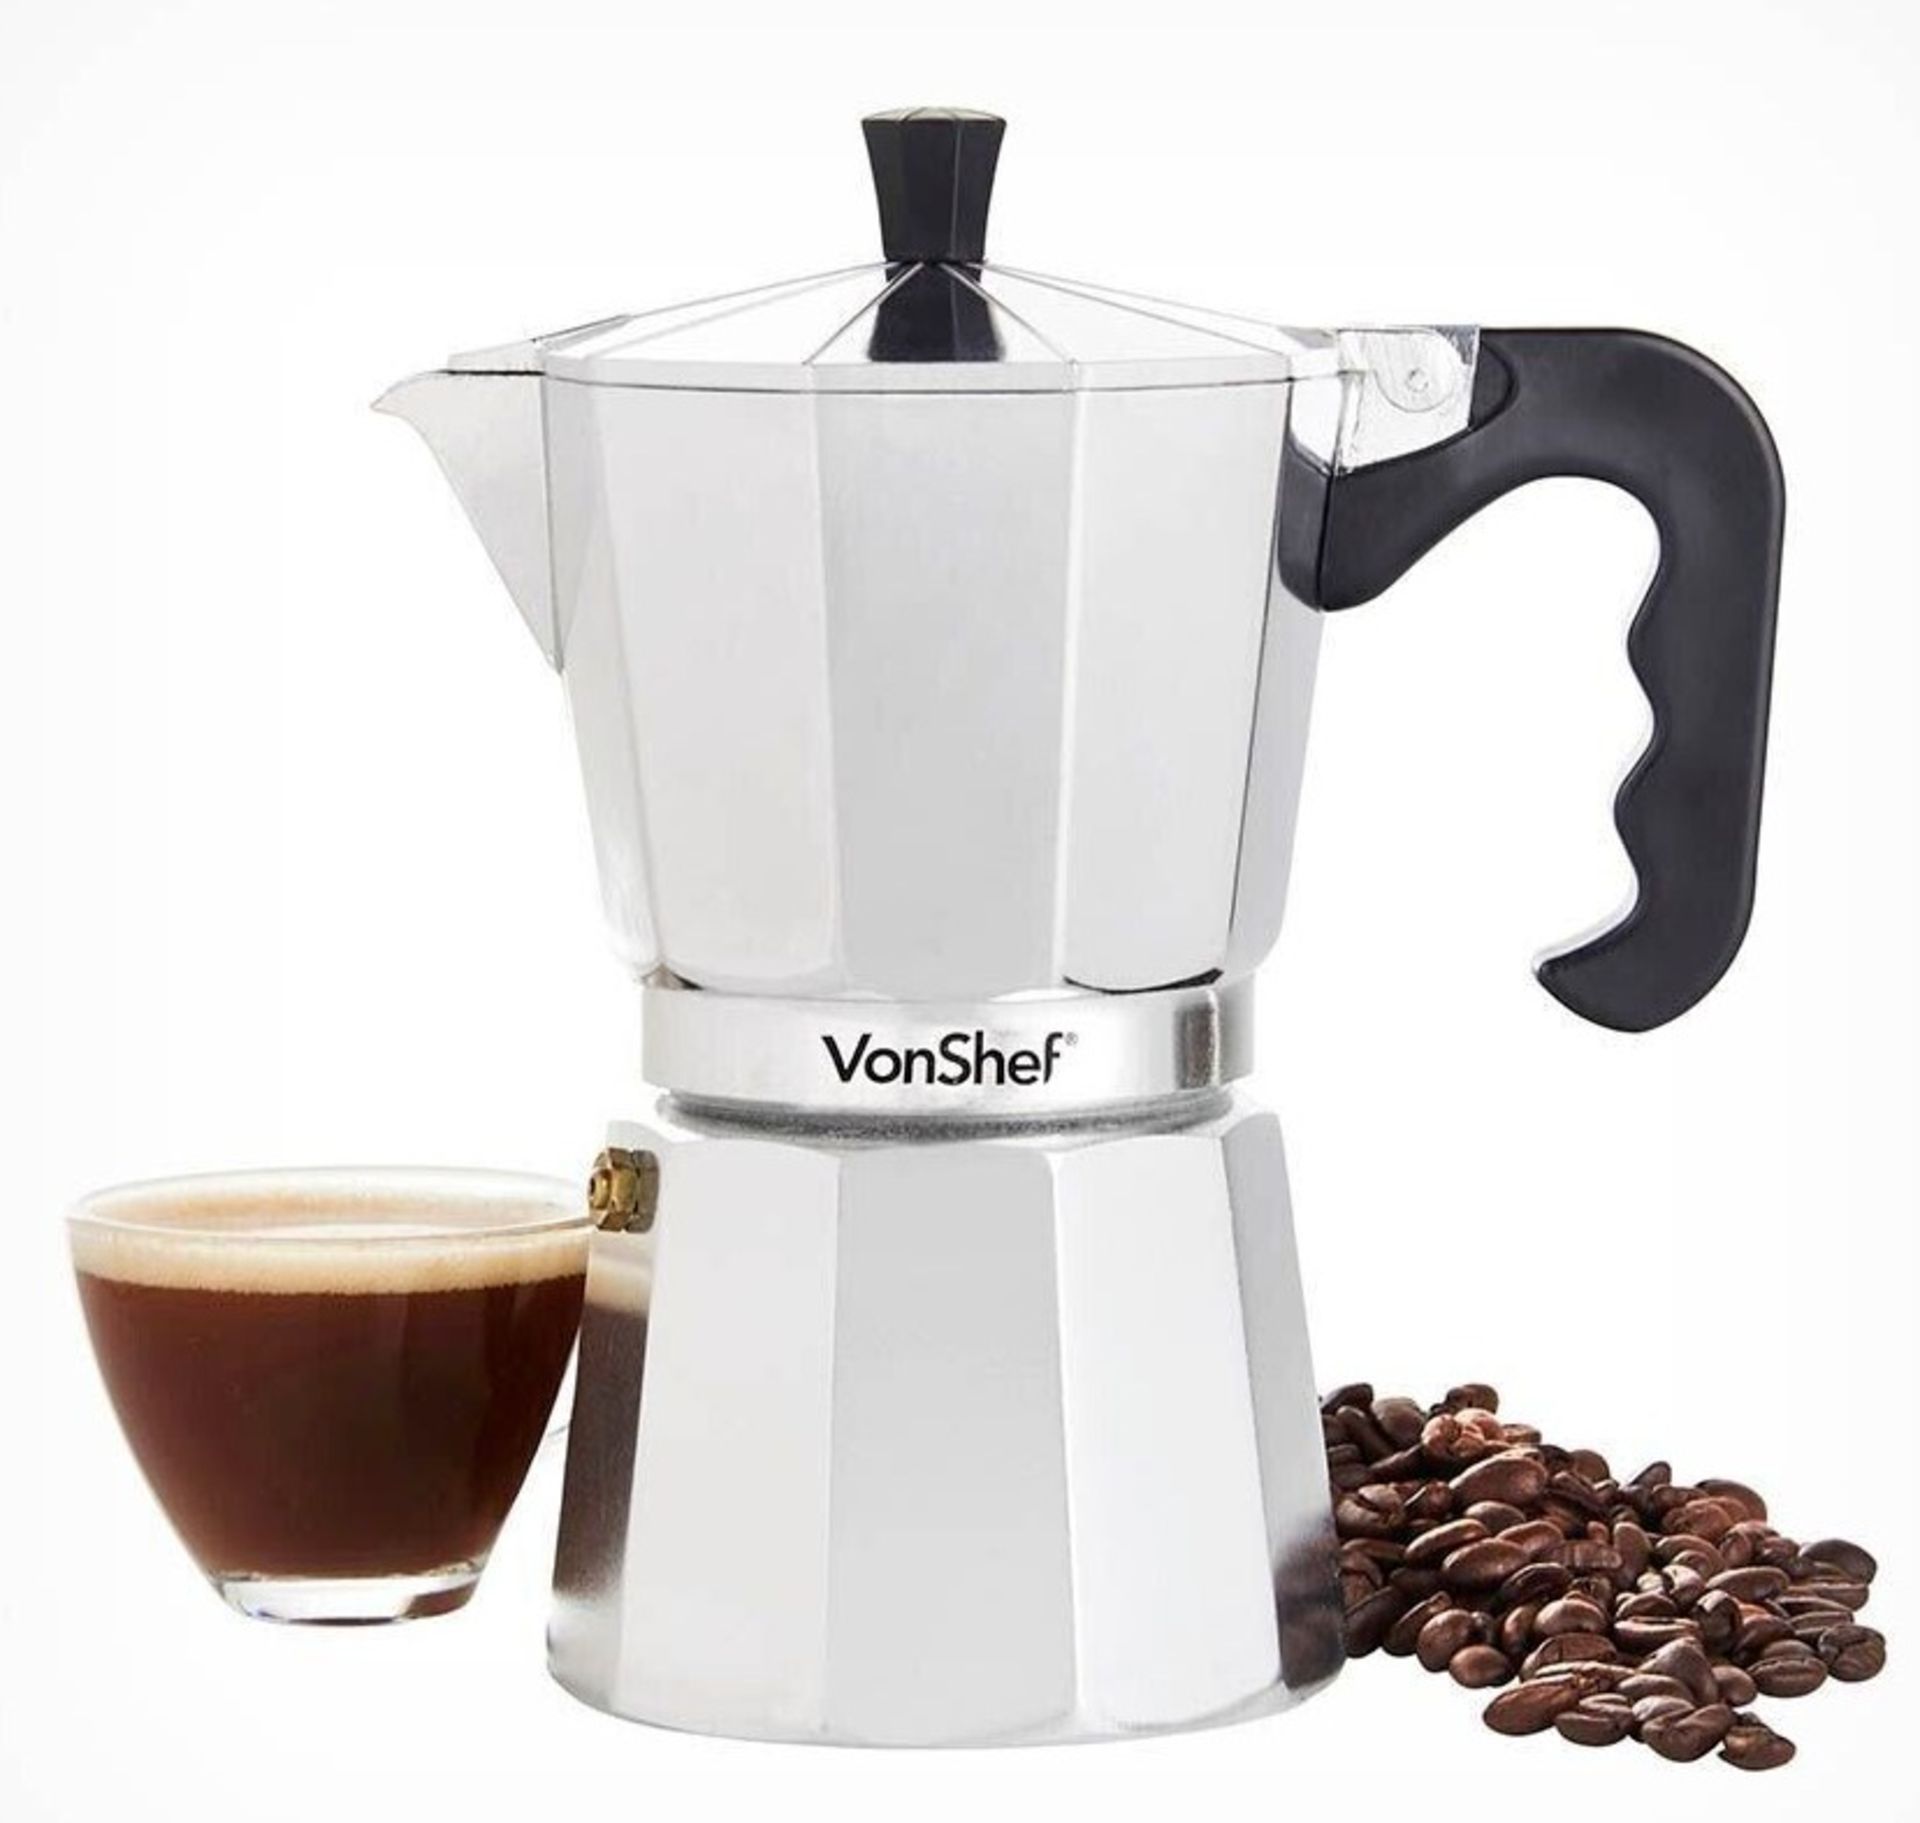 6 Cup 300ml Stainless Steel Espresso Coffee Maker - ER38